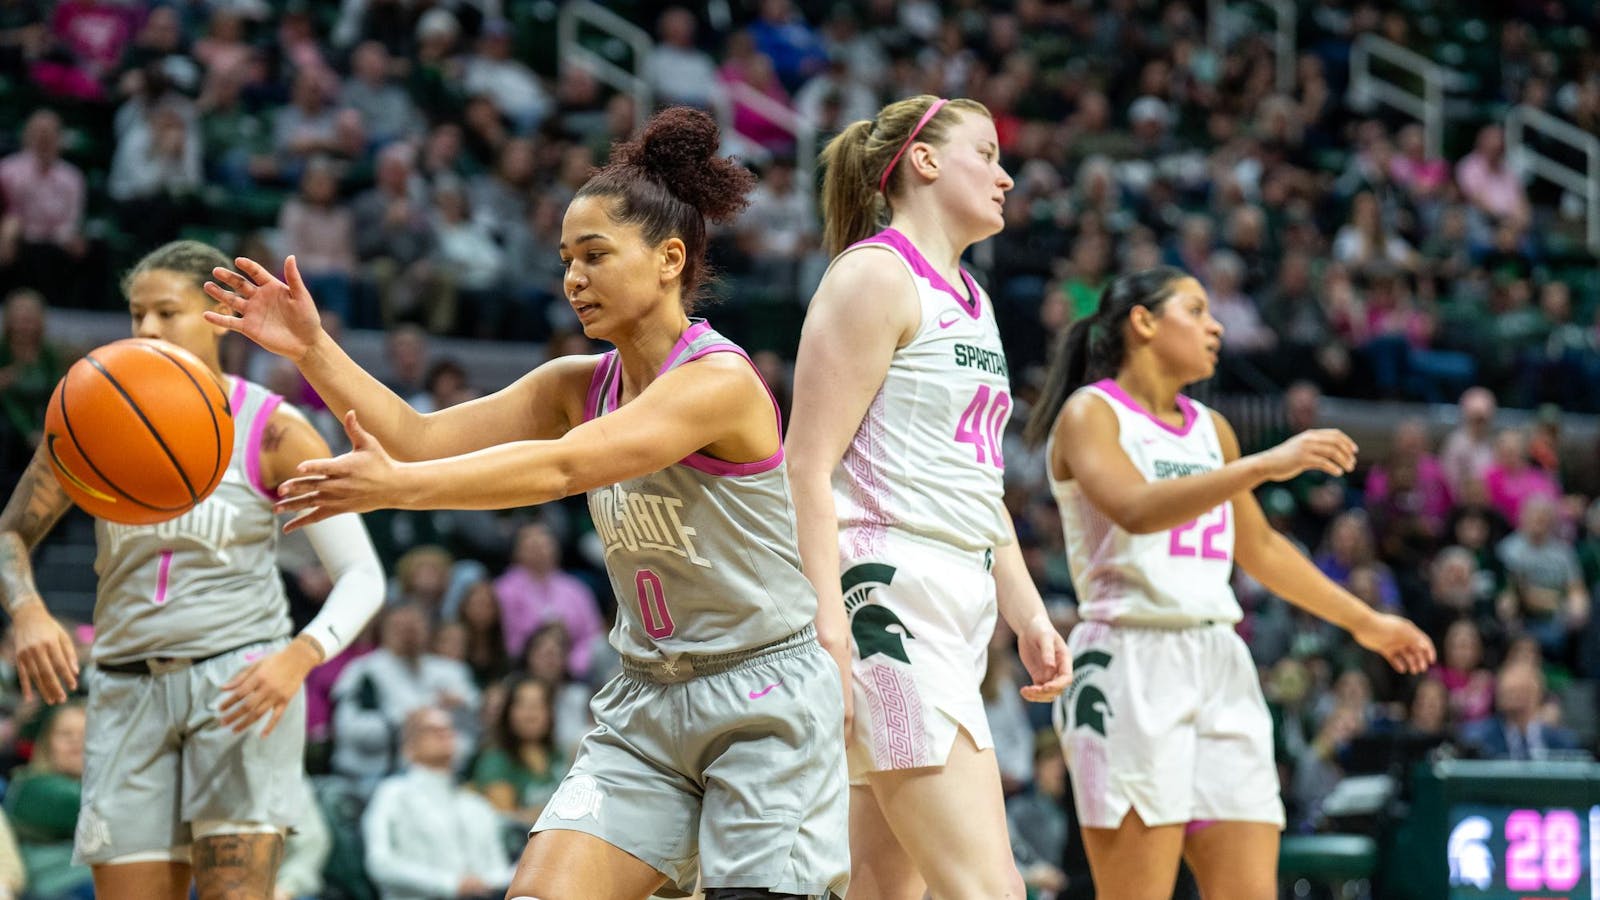 MSU women’s basketball falls to No. 5 Ohio State 86-71, earn second loss at home this season  – The State News